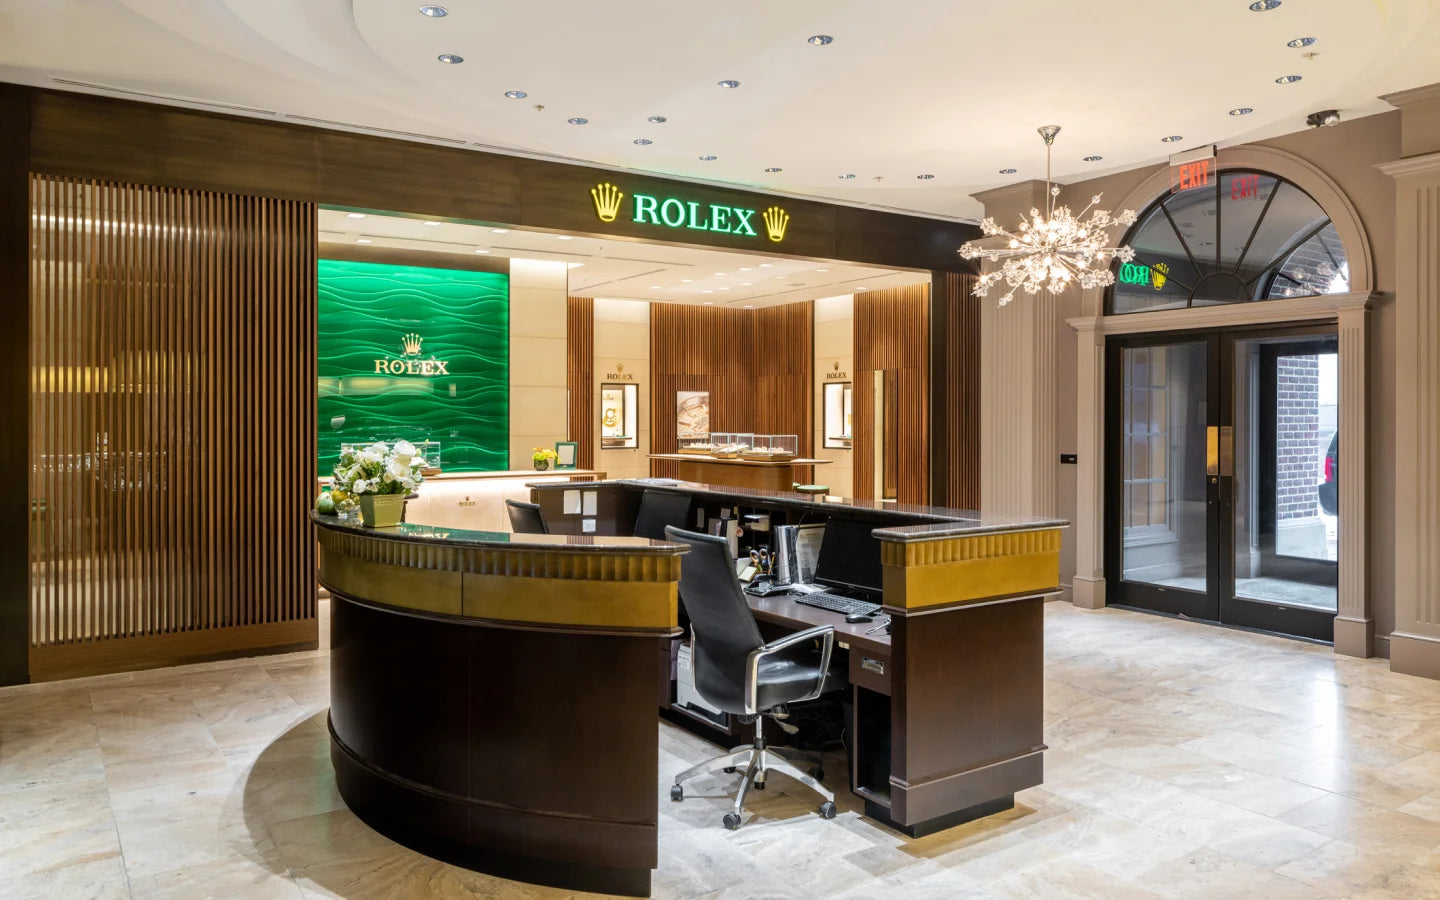 Our Rolex showroom at Orr's Jewelers in Sewickley, PA